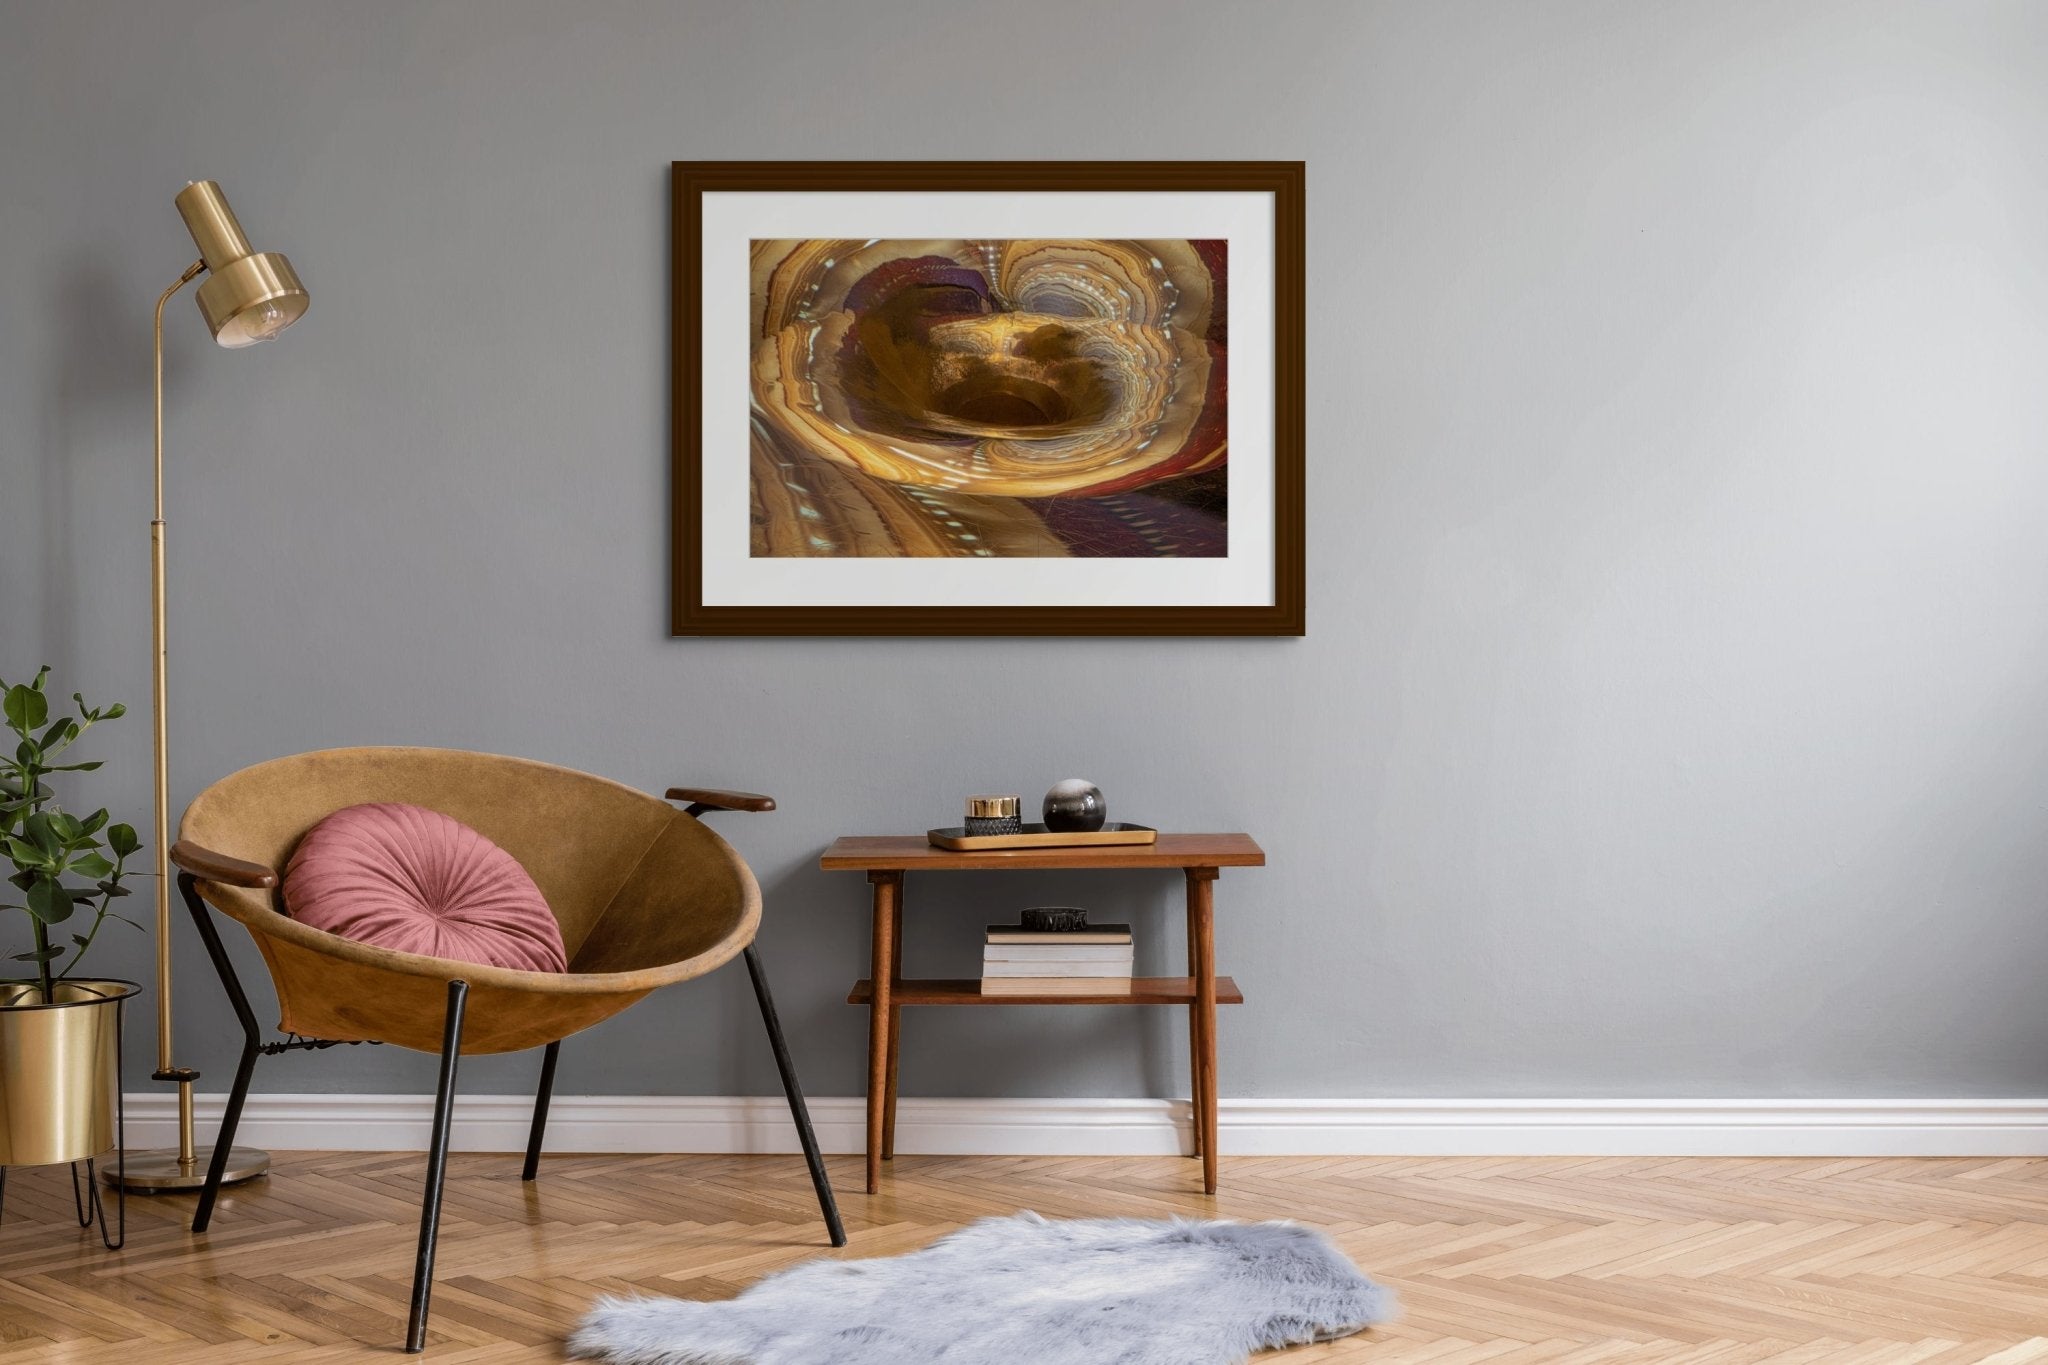 Photo of Yamaha 867d French Horn, Part 1. Signed Limited Edition Museum Quality Print. - Giclée Museum Quality Print - Architecture In Music